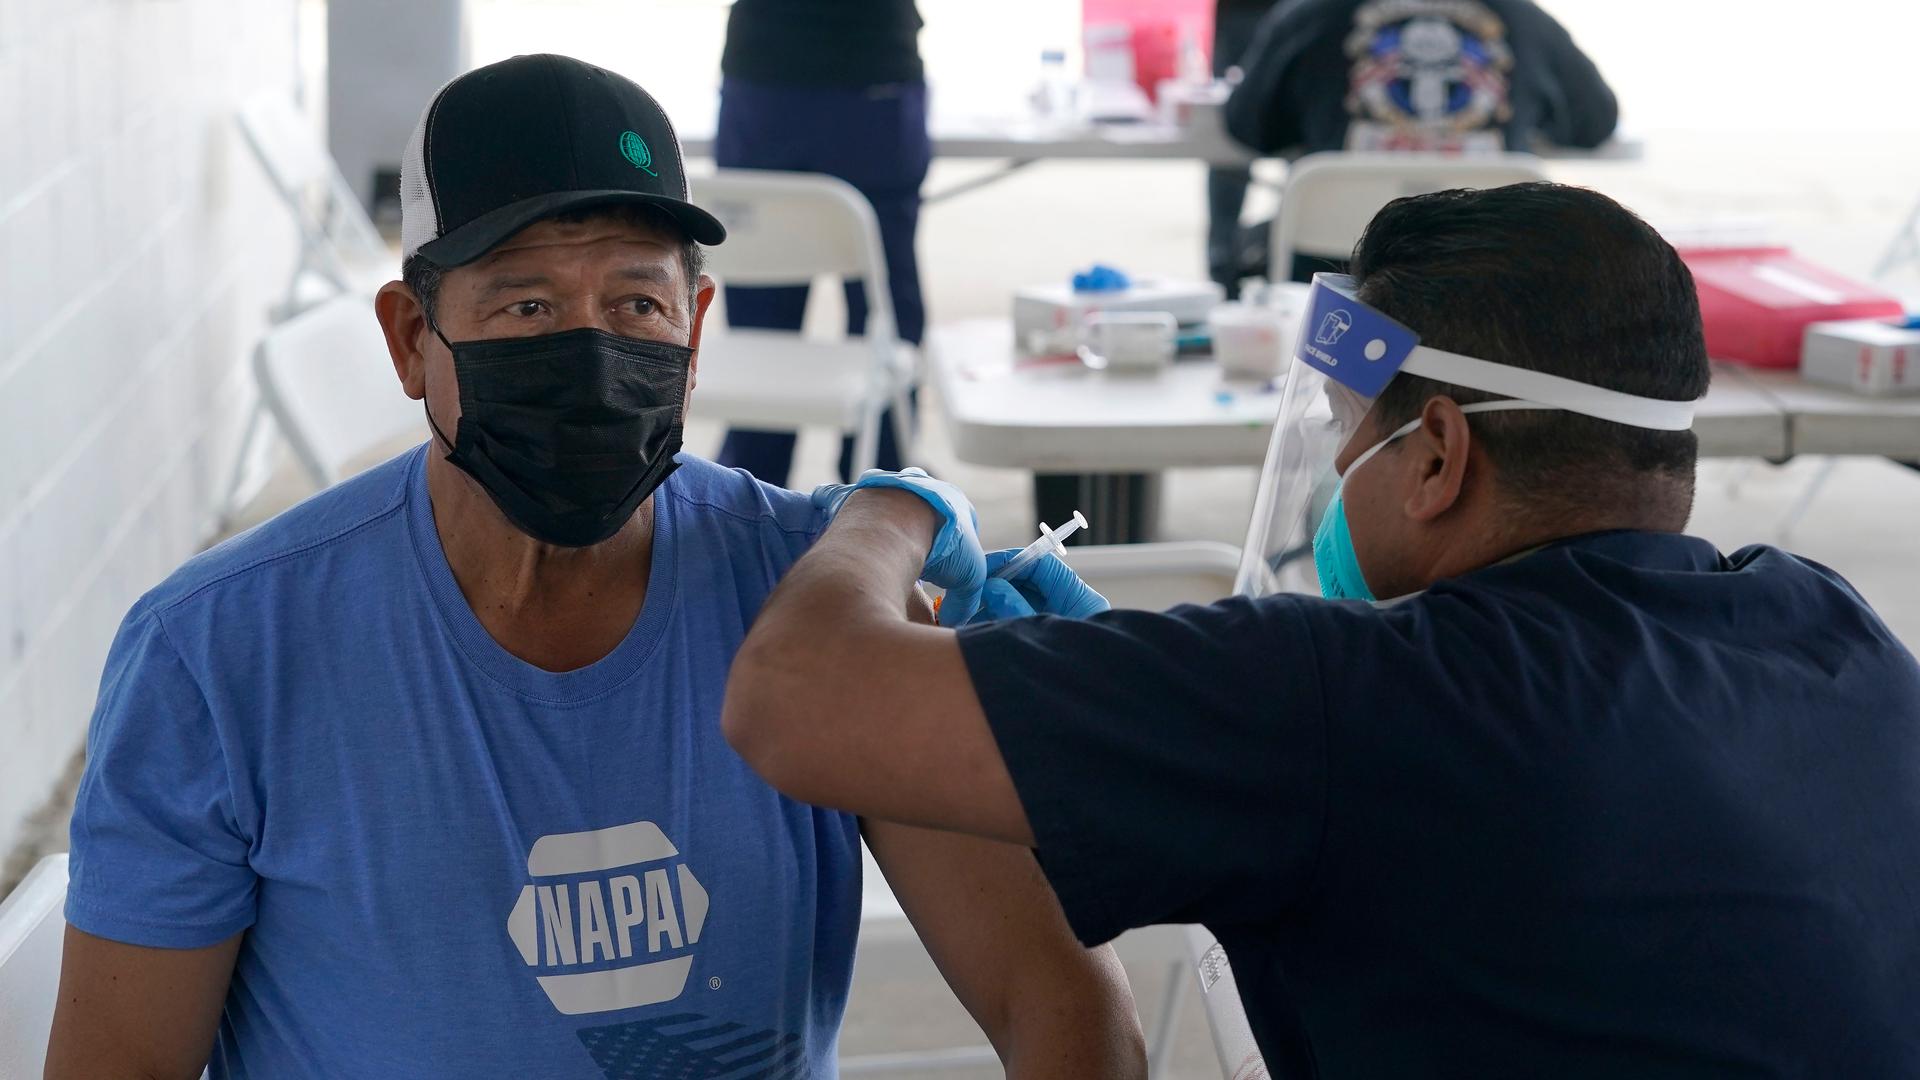 A man wearing a blue shirt and black cap gets a vaccine shot by a health care worker. 